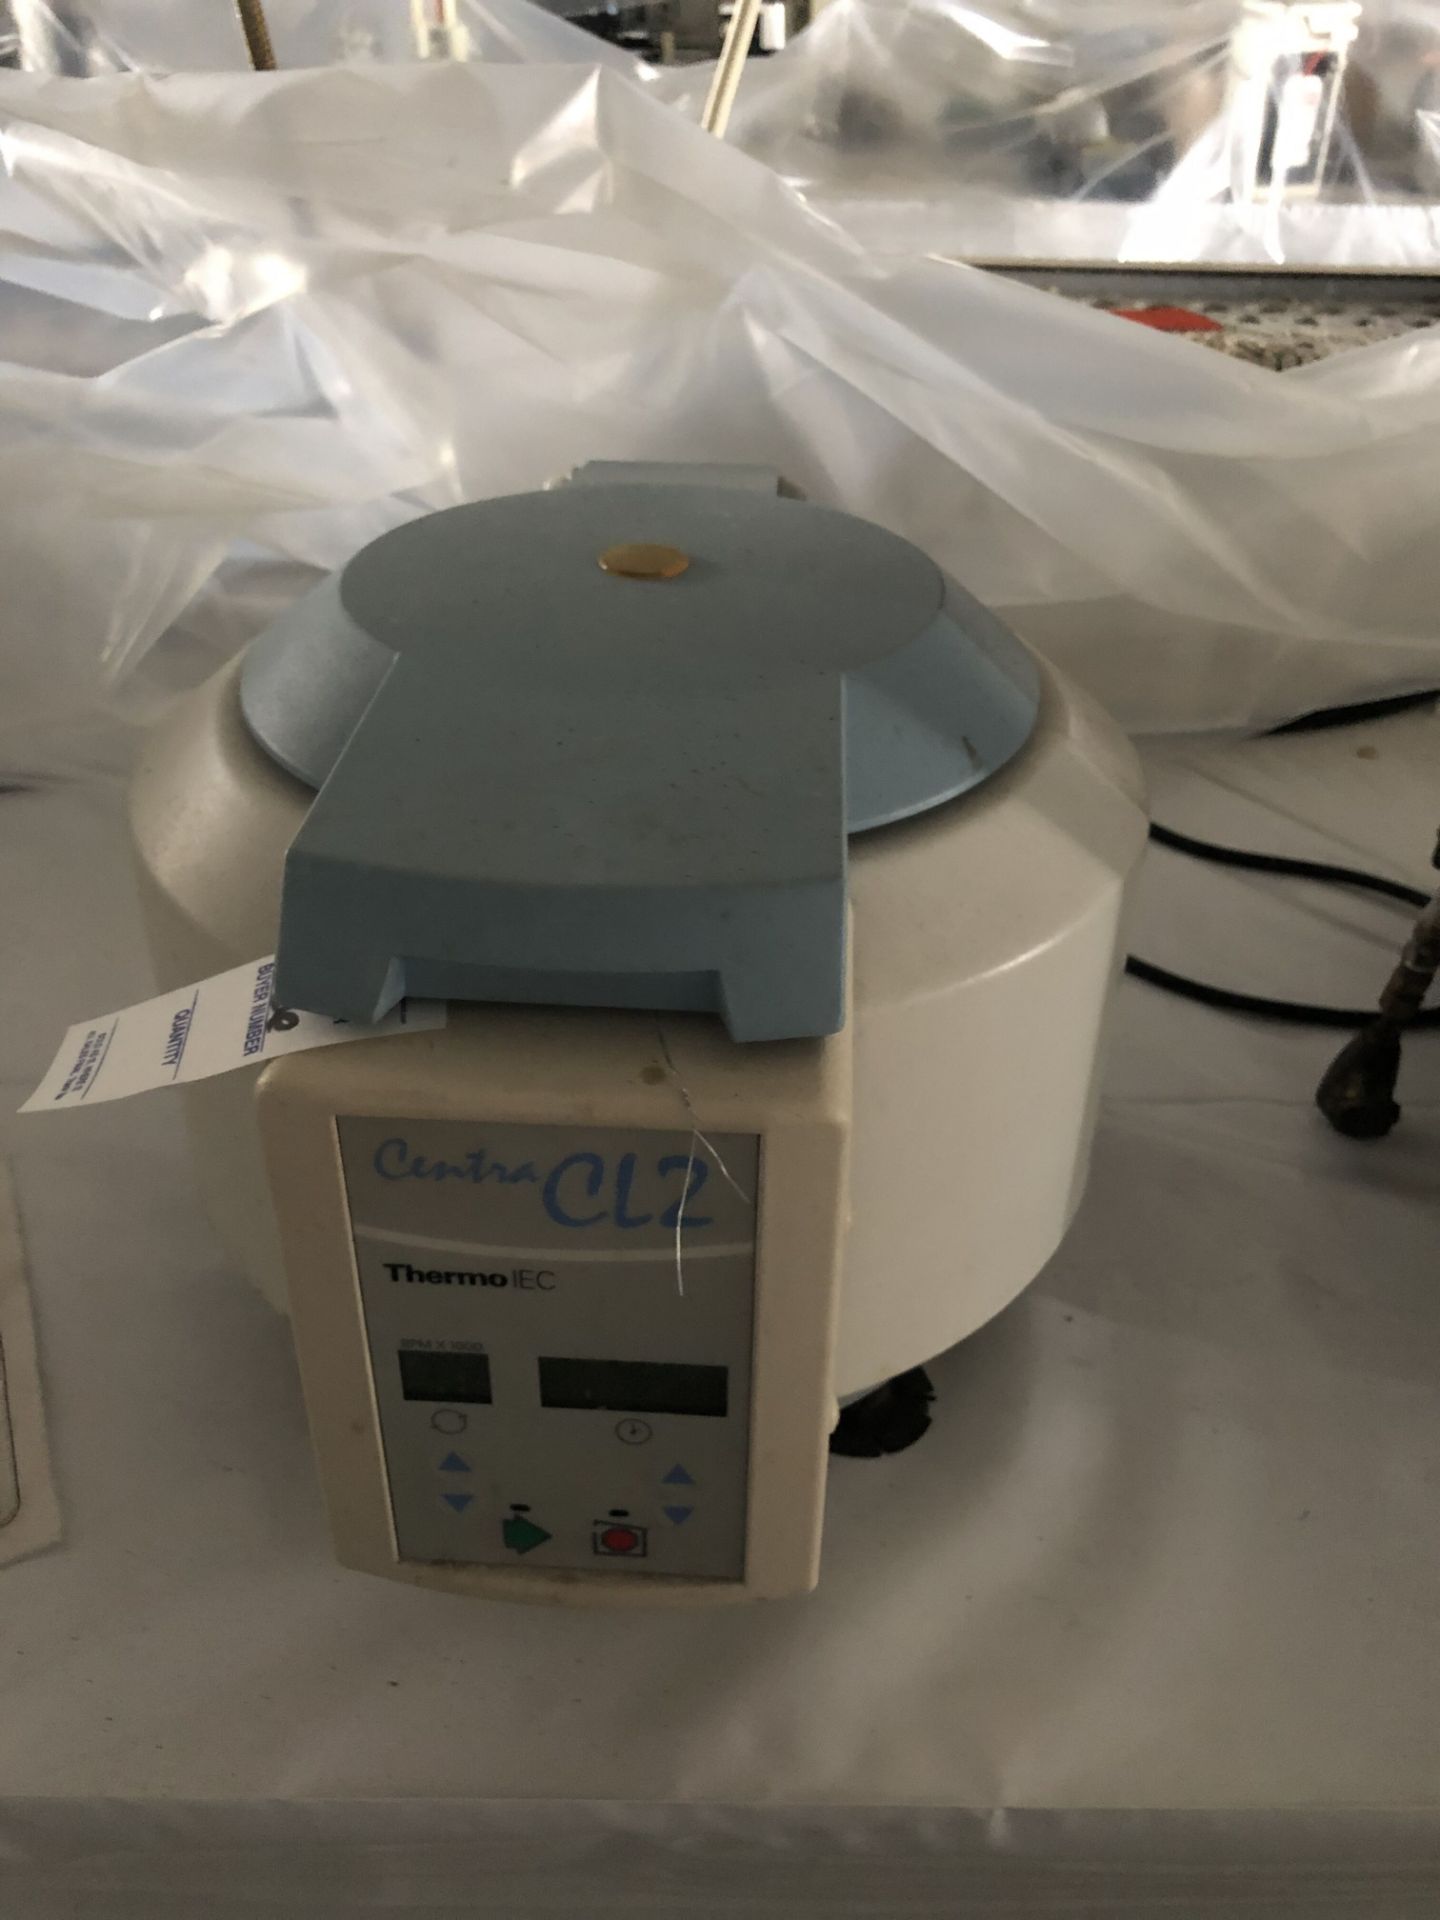 Centra CL2 Thermo IEC GH10 Series